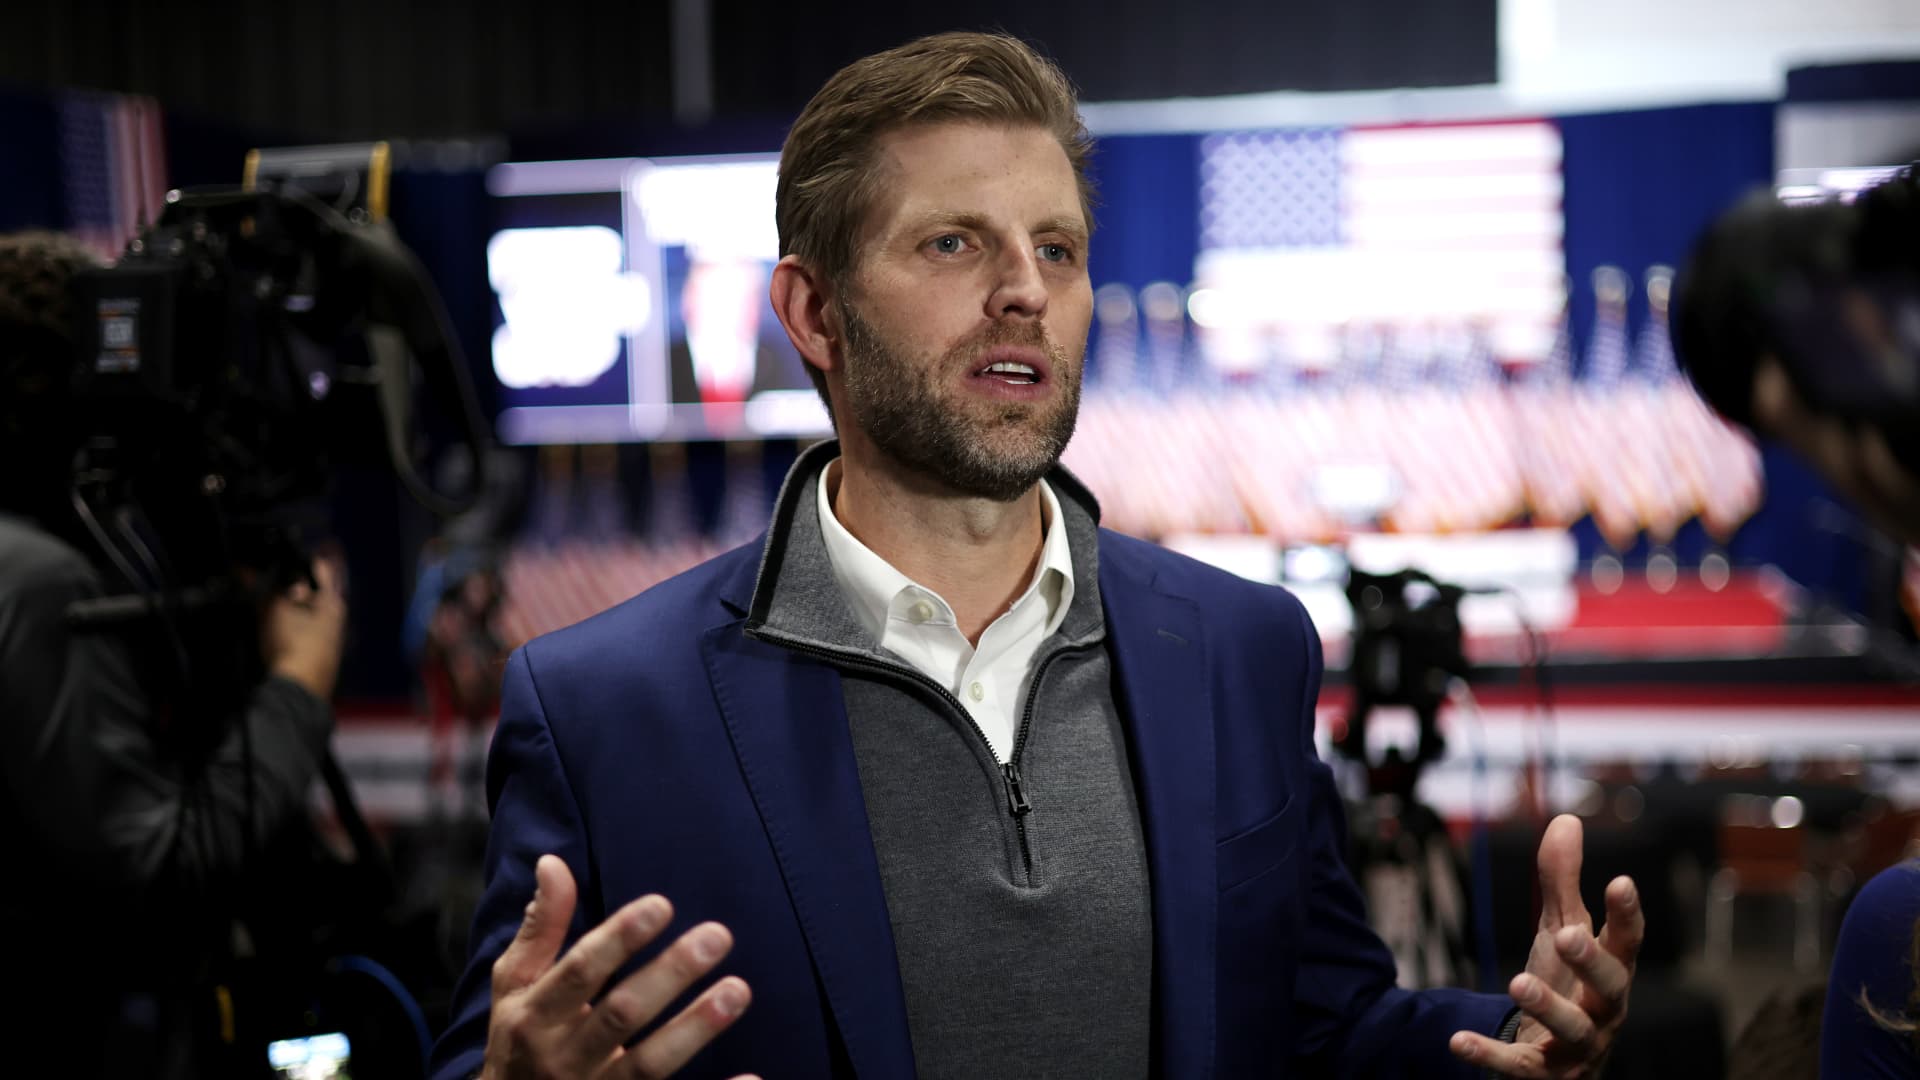 Former President Donald Trump's son Eric Trump speaks to media before his father's caucus night event at the Iowa Events Center on January 15, 2024 in Des Moines, Iowa.